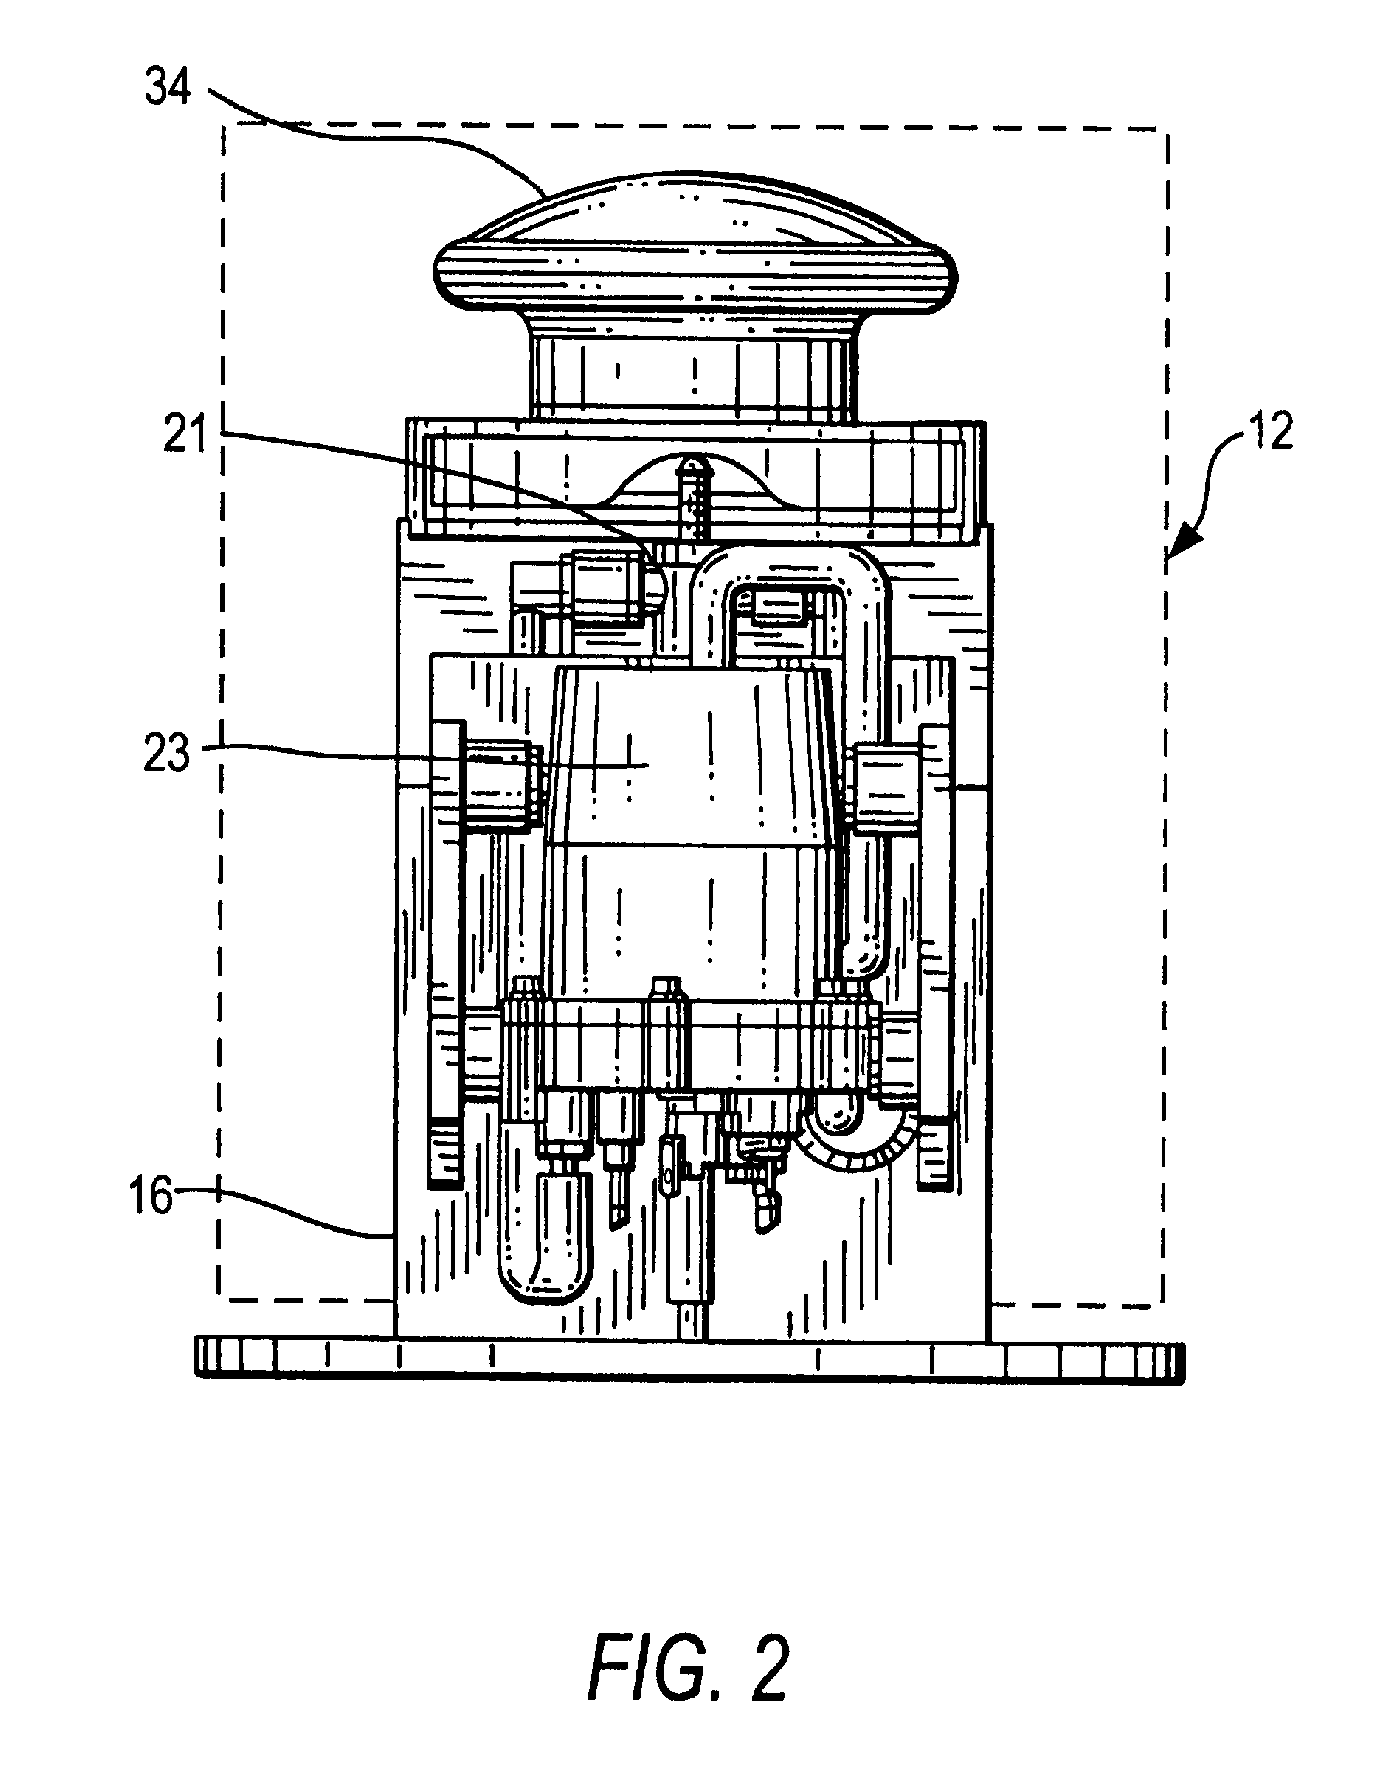 Multi-directional actuator for a pump